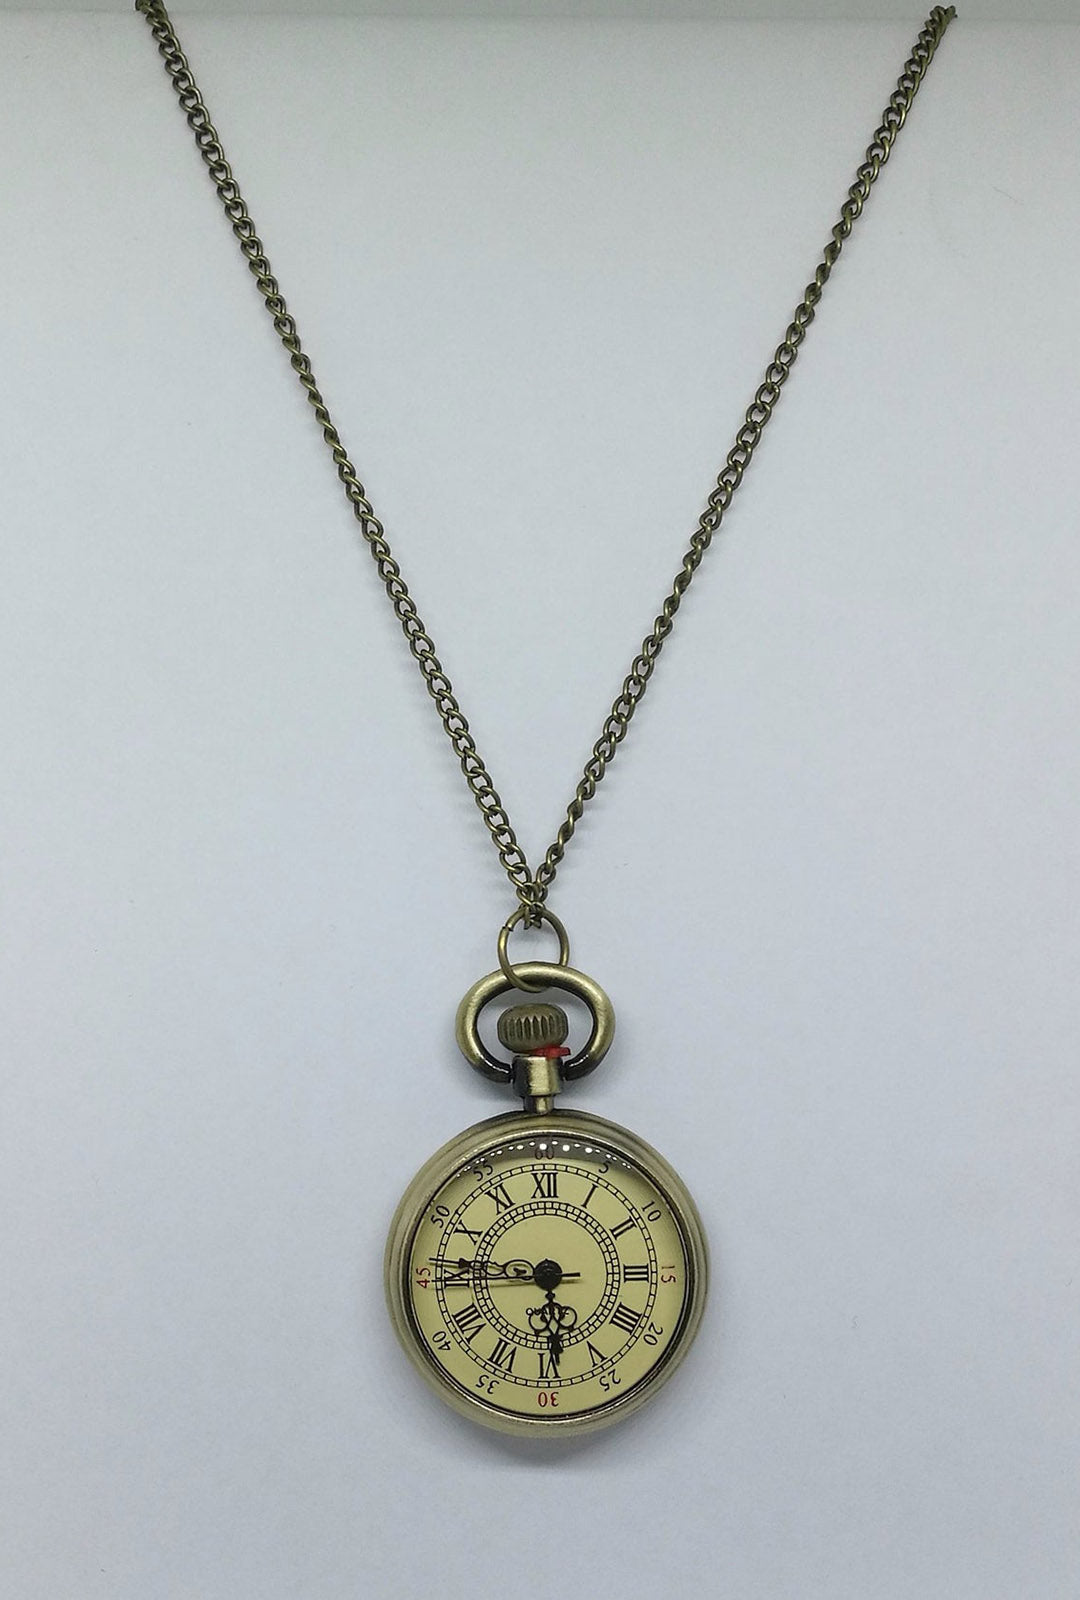 Vintage Style Open Faced Pocket Watch (G)